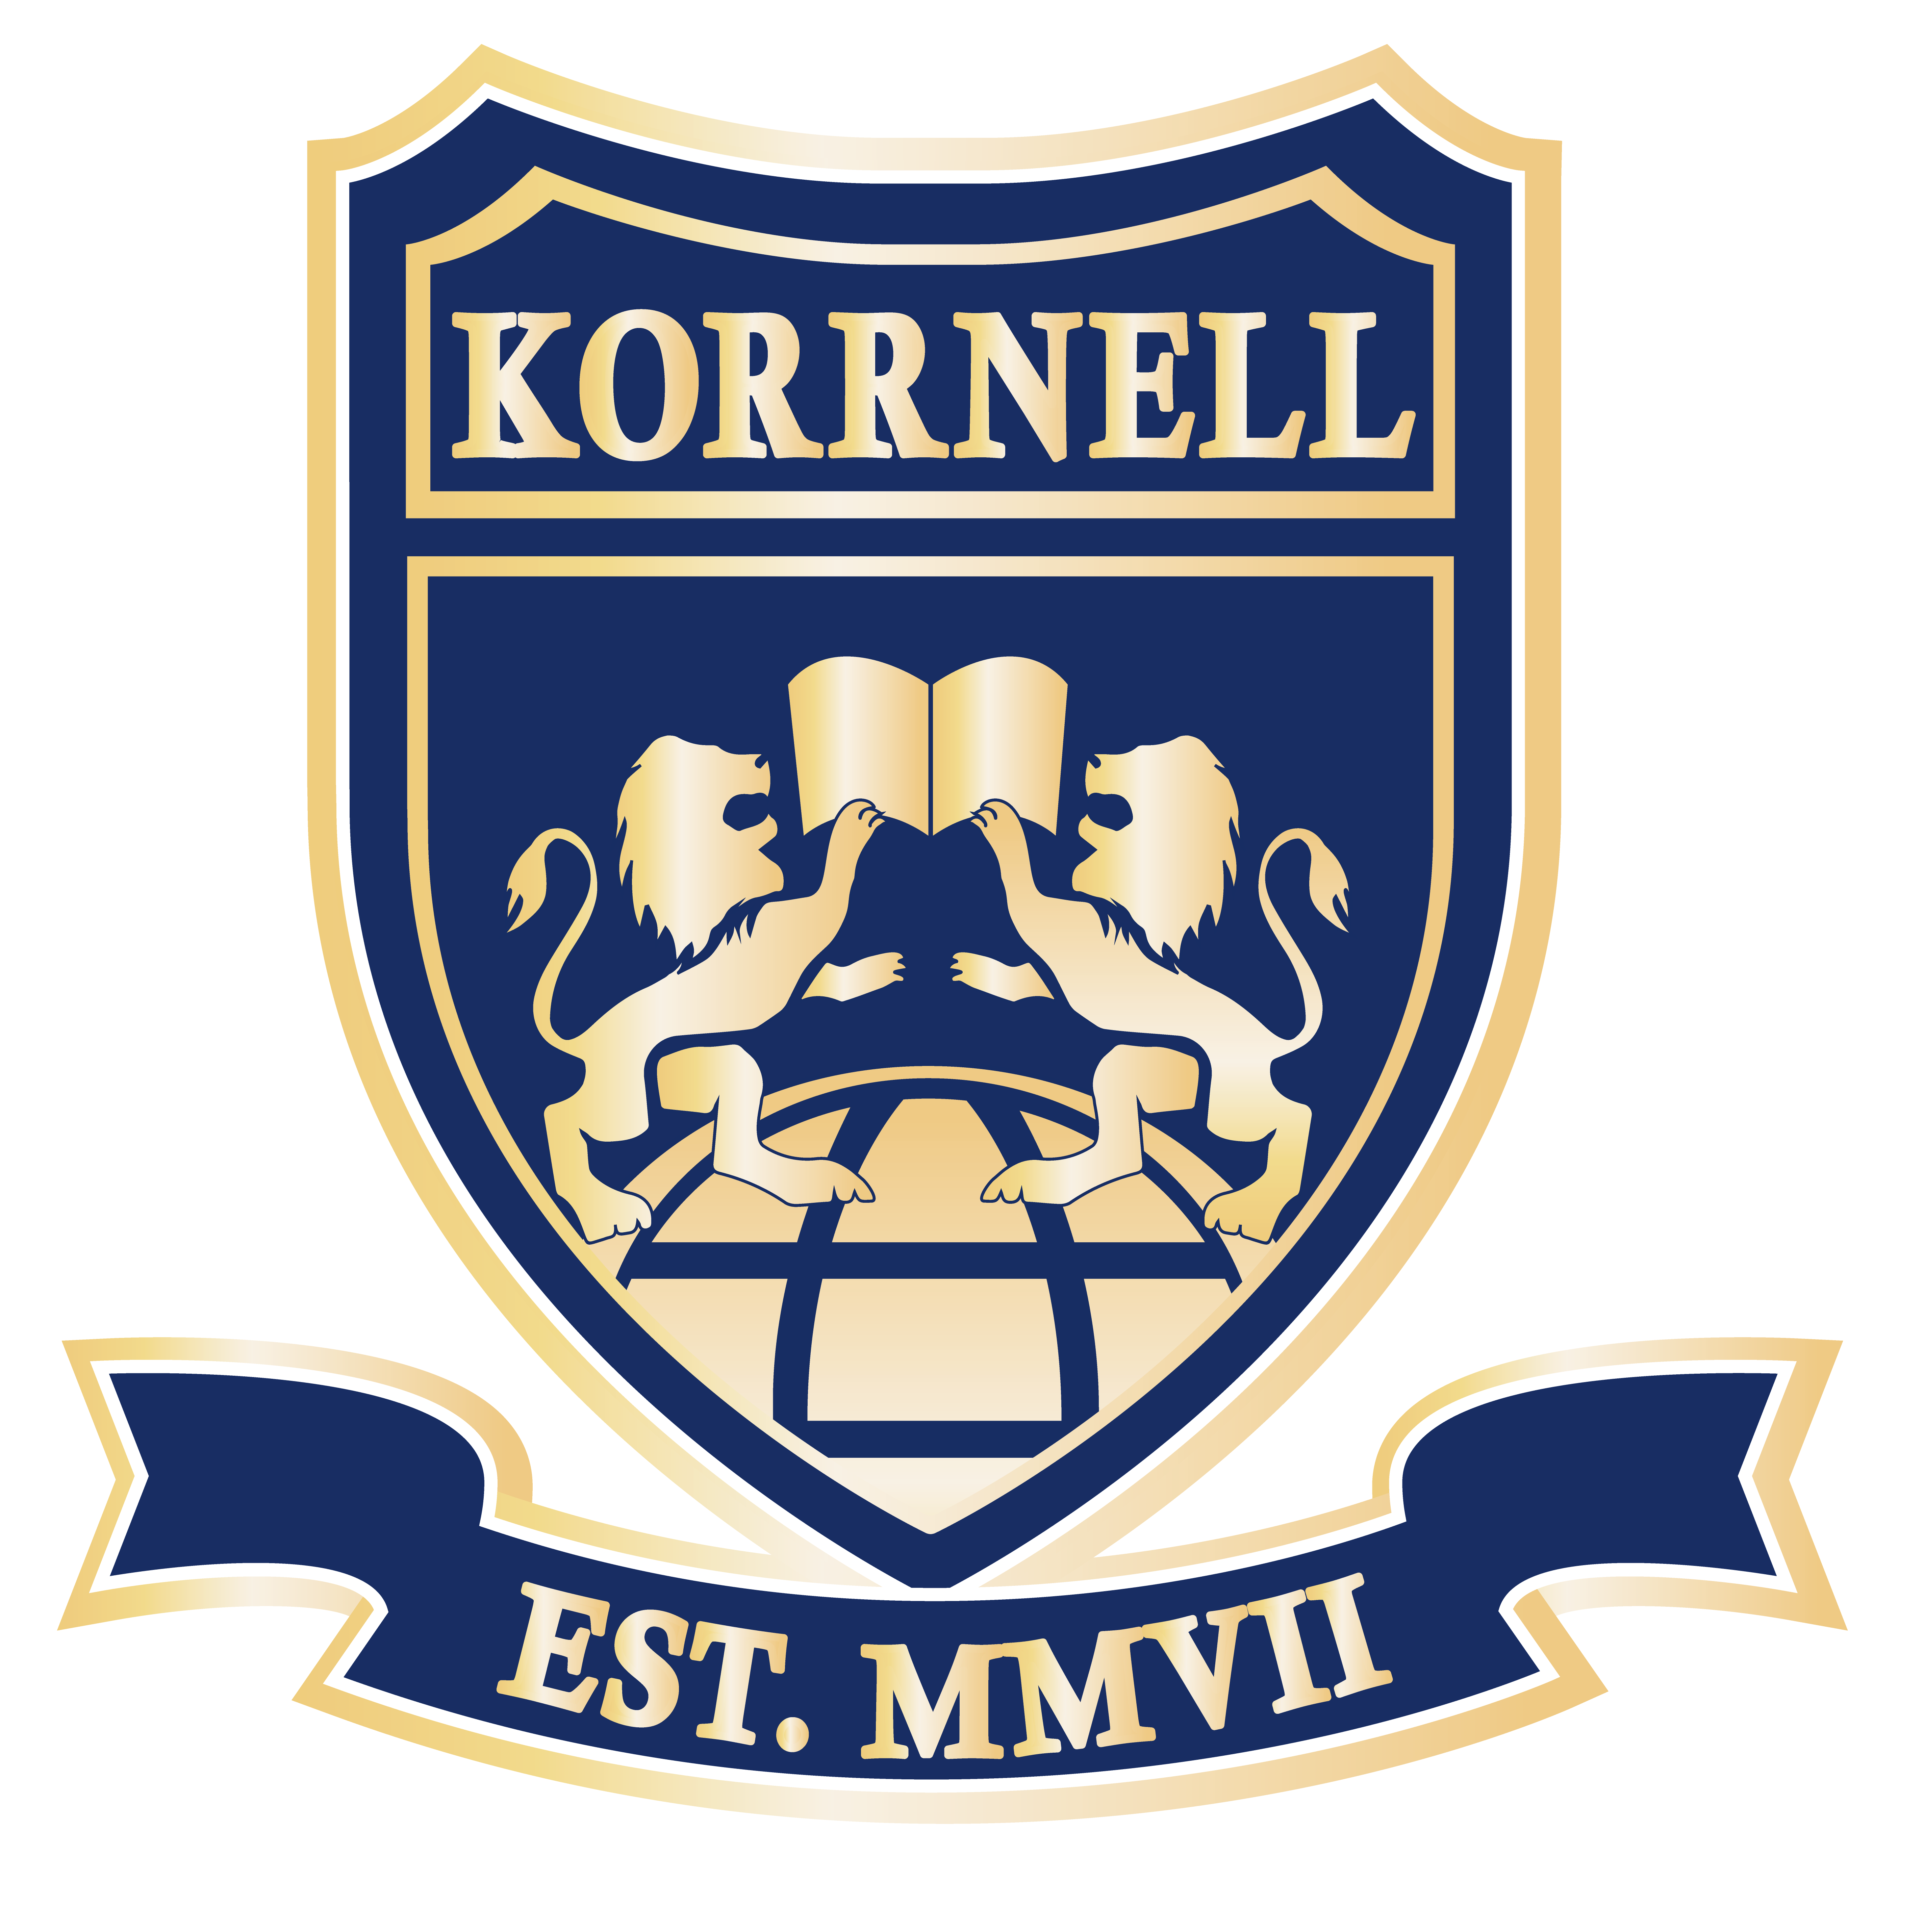 Teaching English and Living in Taiwan Jobs Available 教學工作, Hsinchu Korrnell  Academy   Hsinchu Korrnell Academy  image